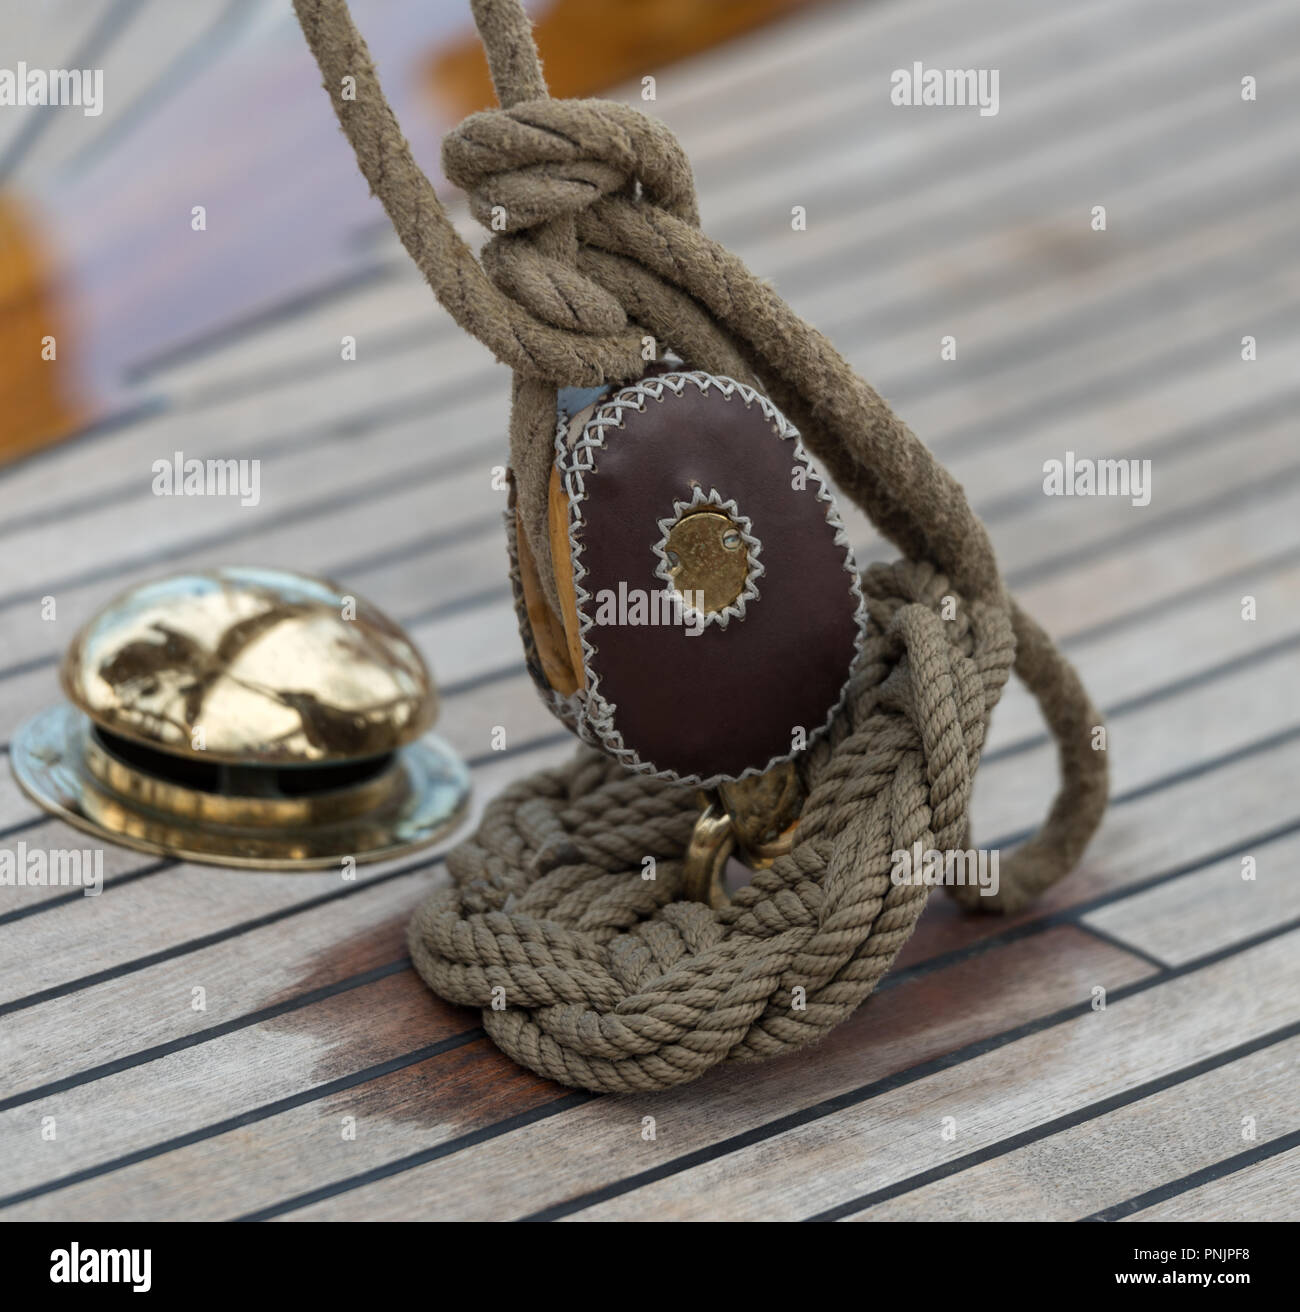 Sailing boat pulley with nautical rope Stock Photo